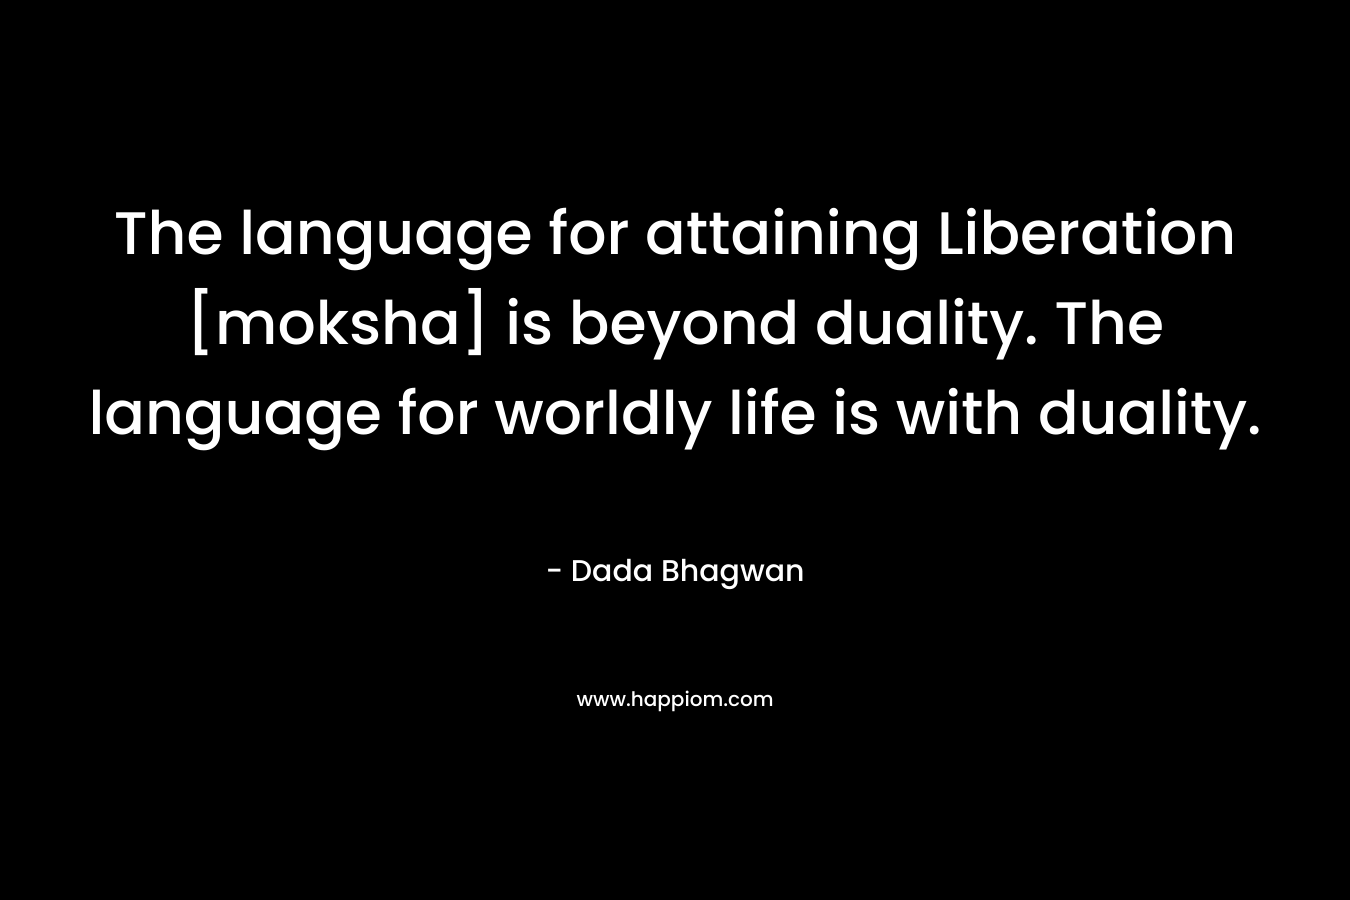 The language for attaining Liberation [moksha] is beyond duality. The language for worldly life is with duality. – Dada Bhagwan